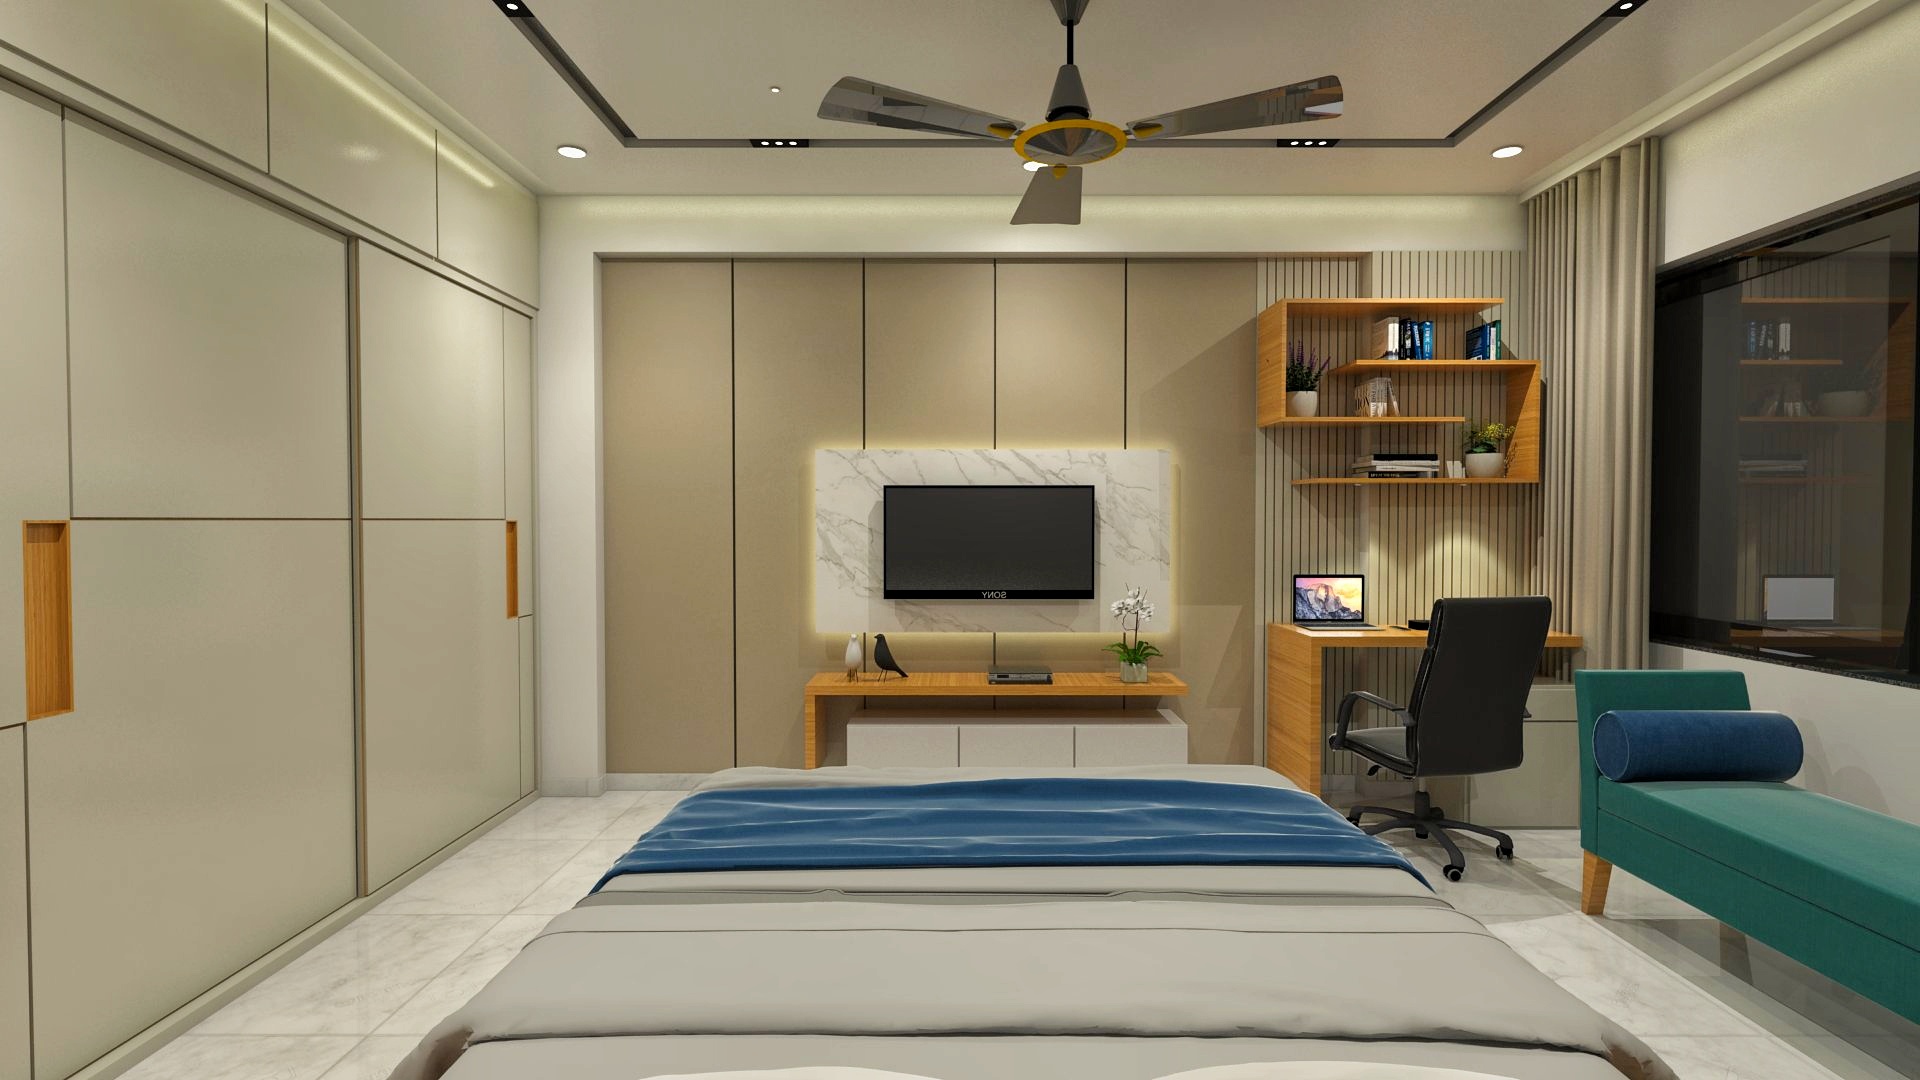 Modern Bedroom With Wall Shelves